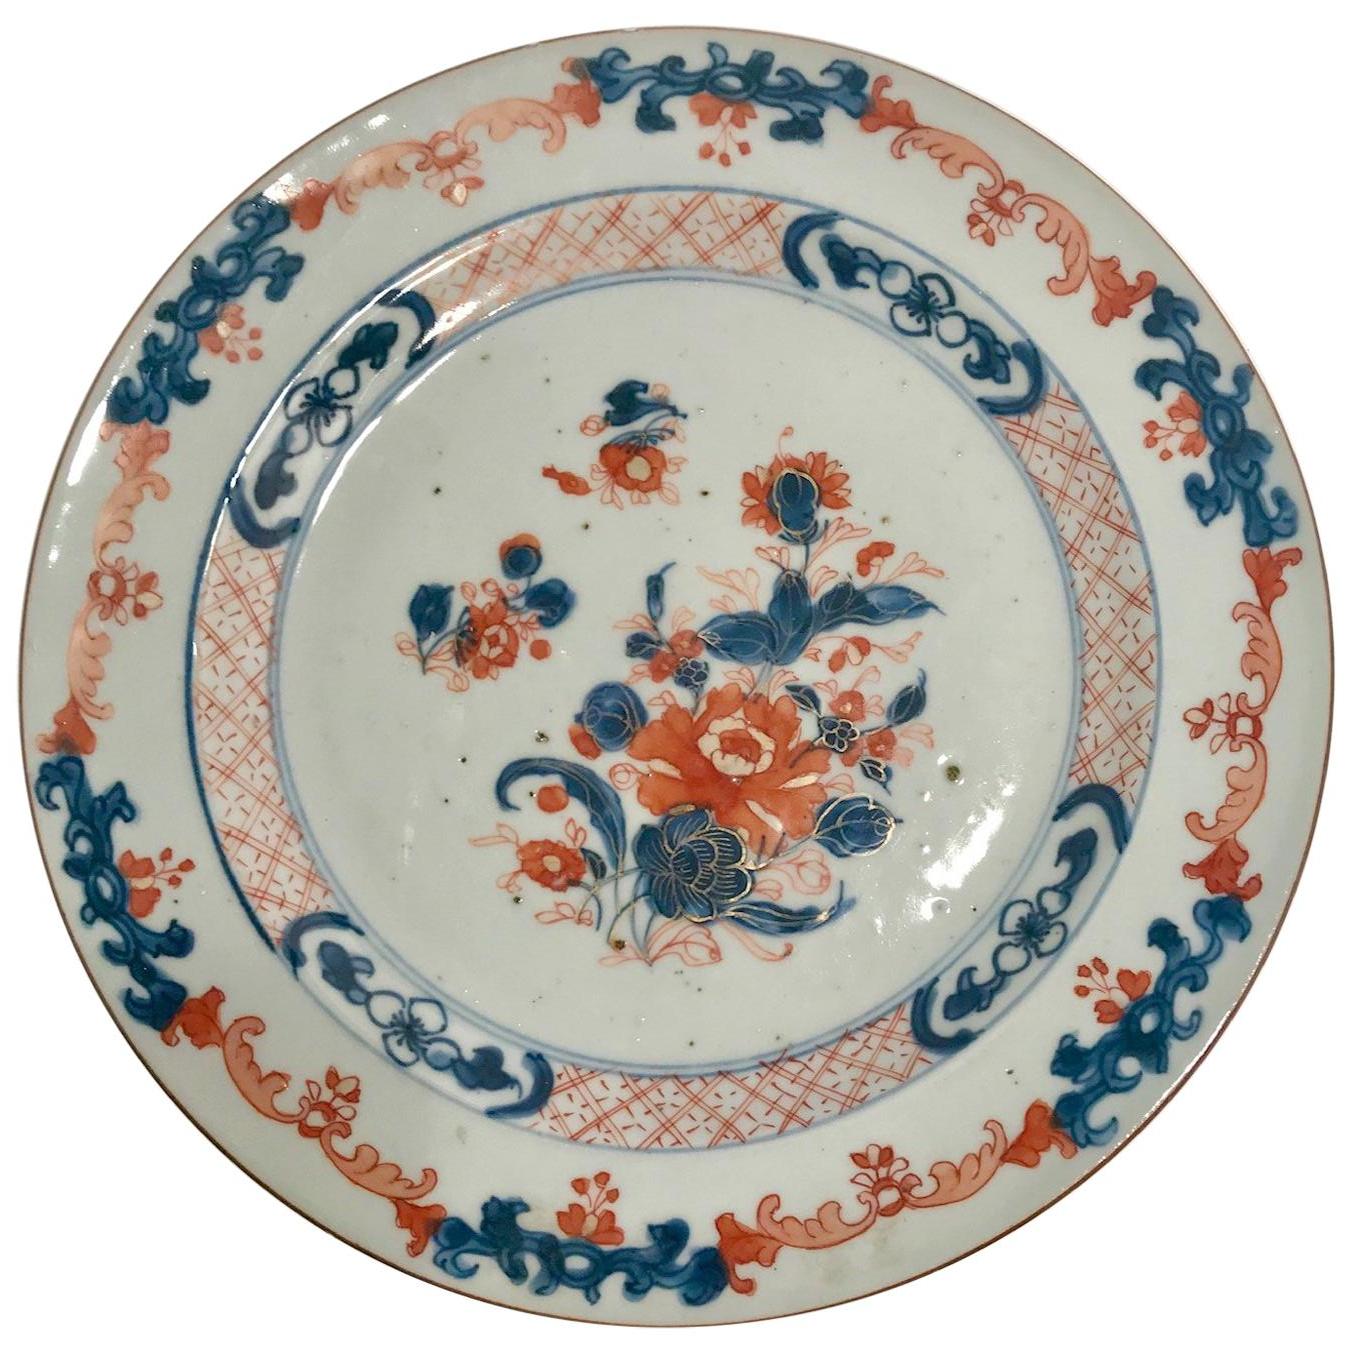 The Elinor Gordon Collection-Chinese Imari Export Porcelain Plate